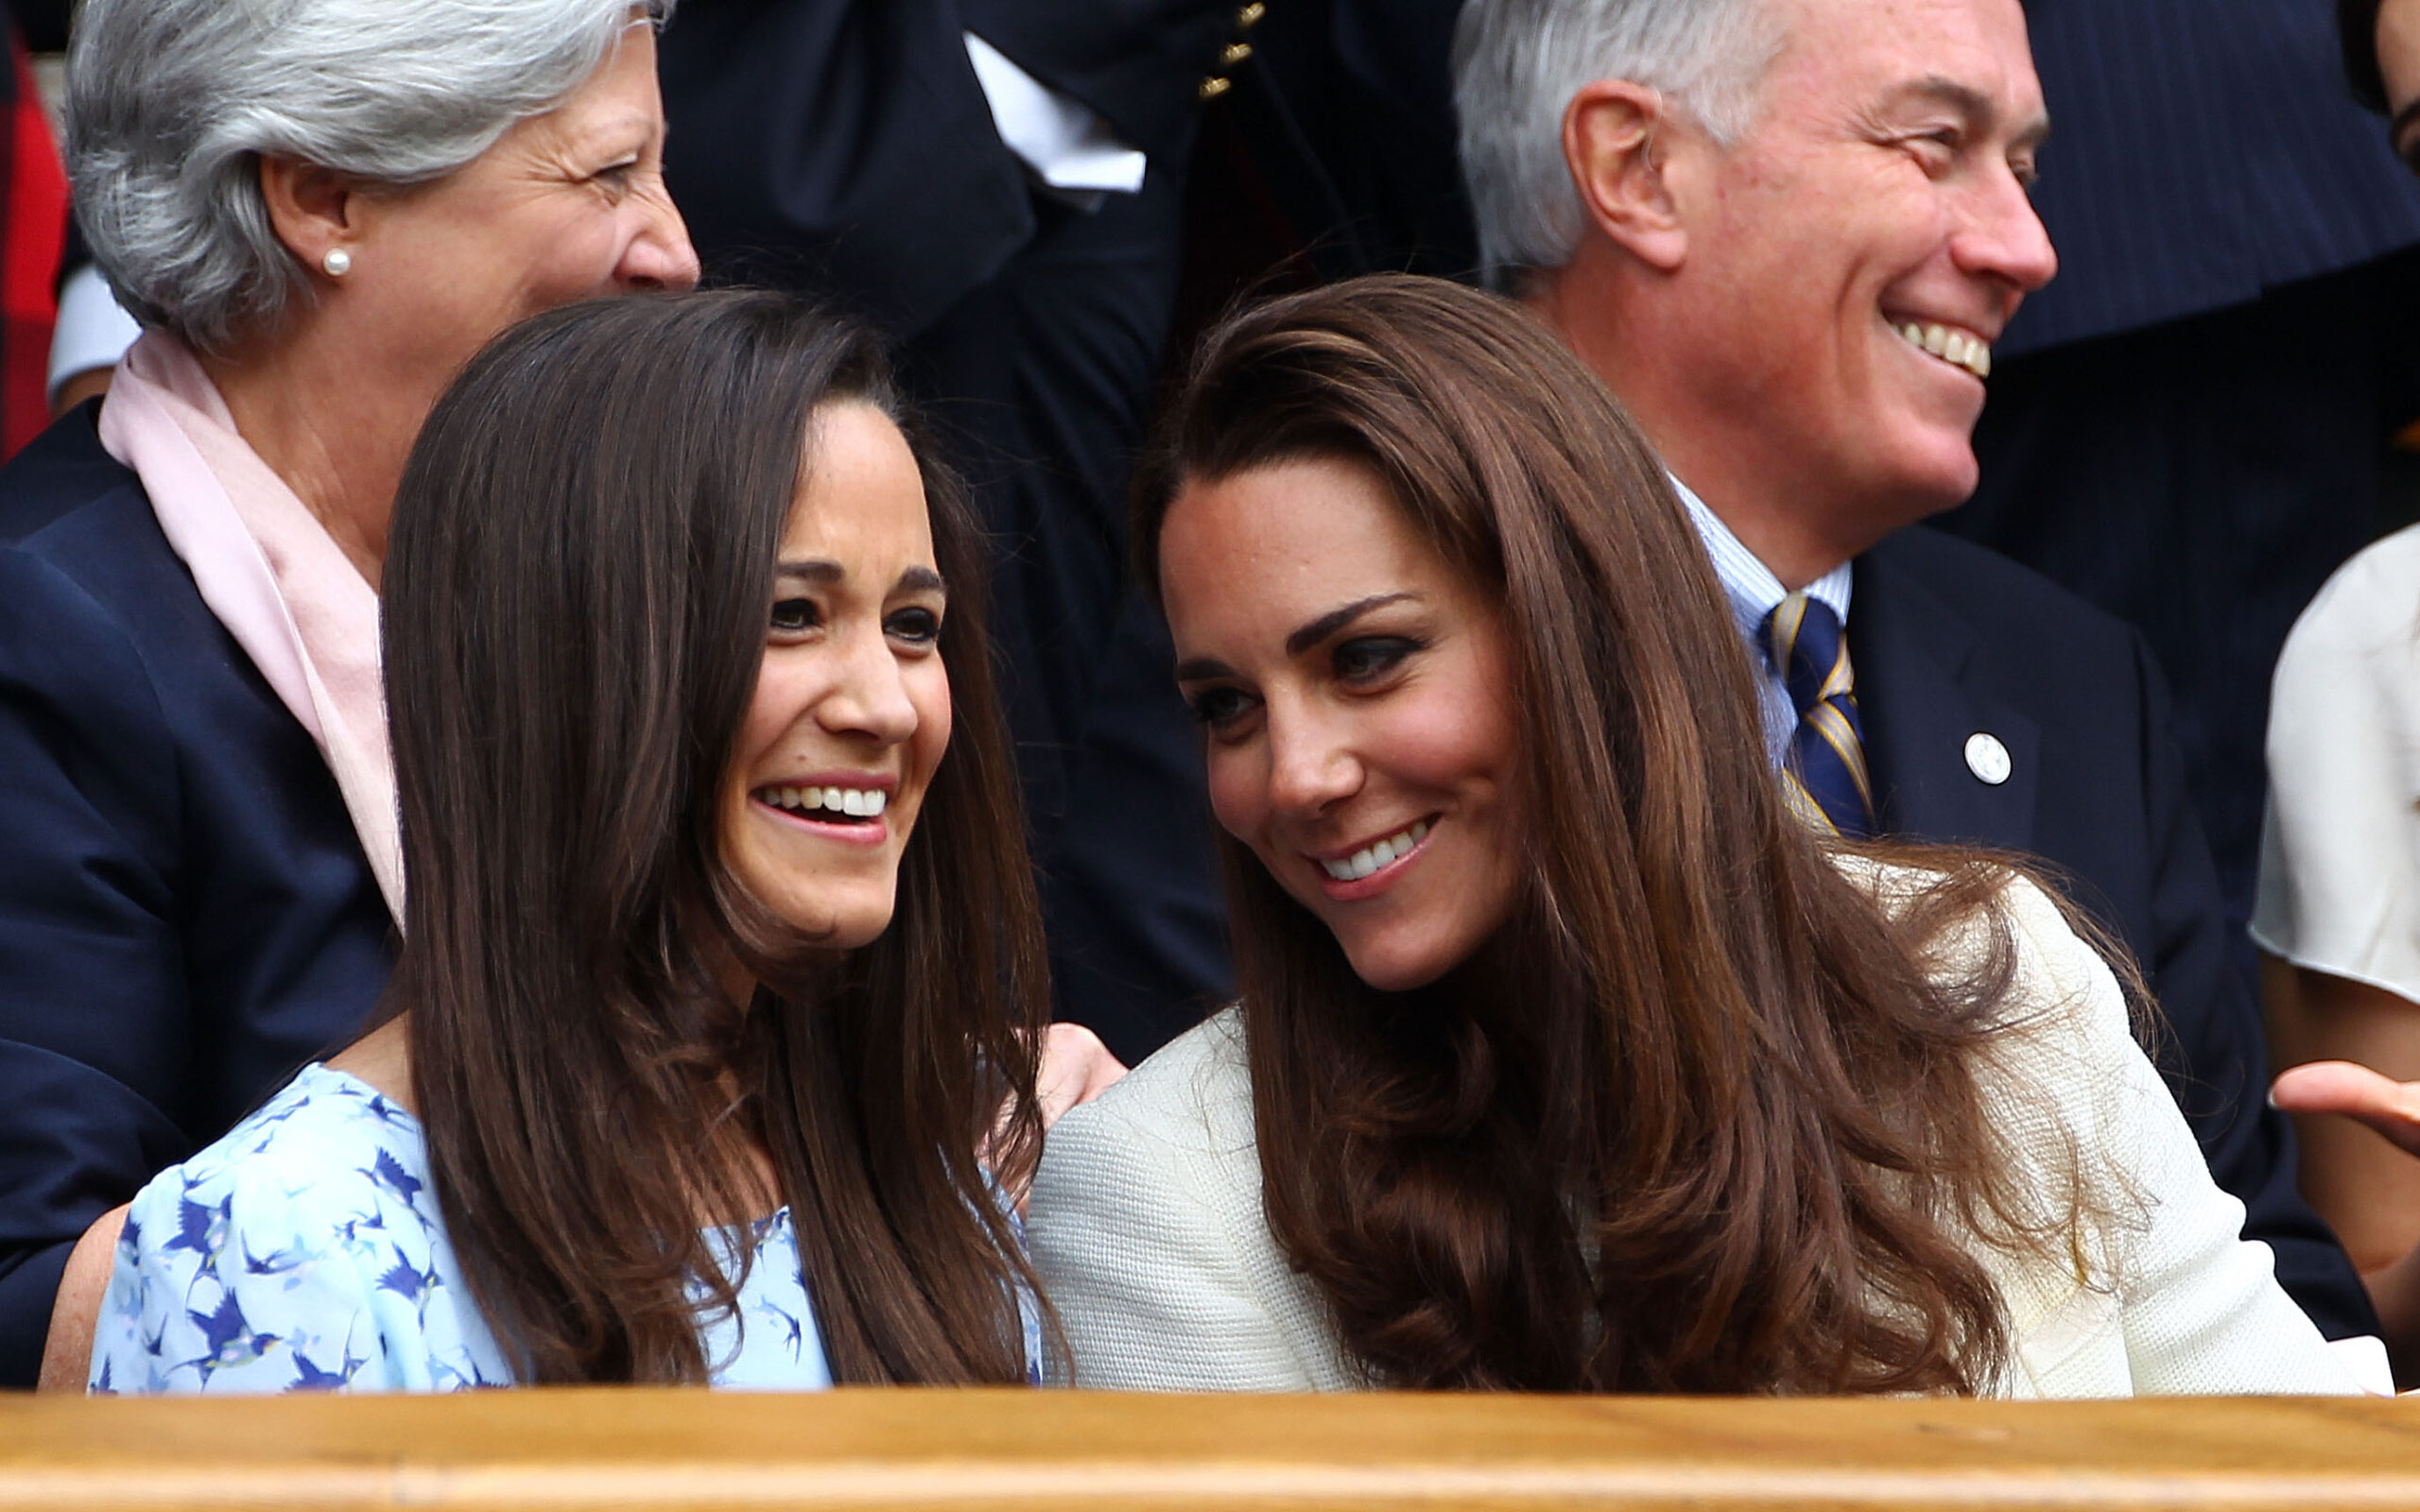 Kate and Pippa Middleton